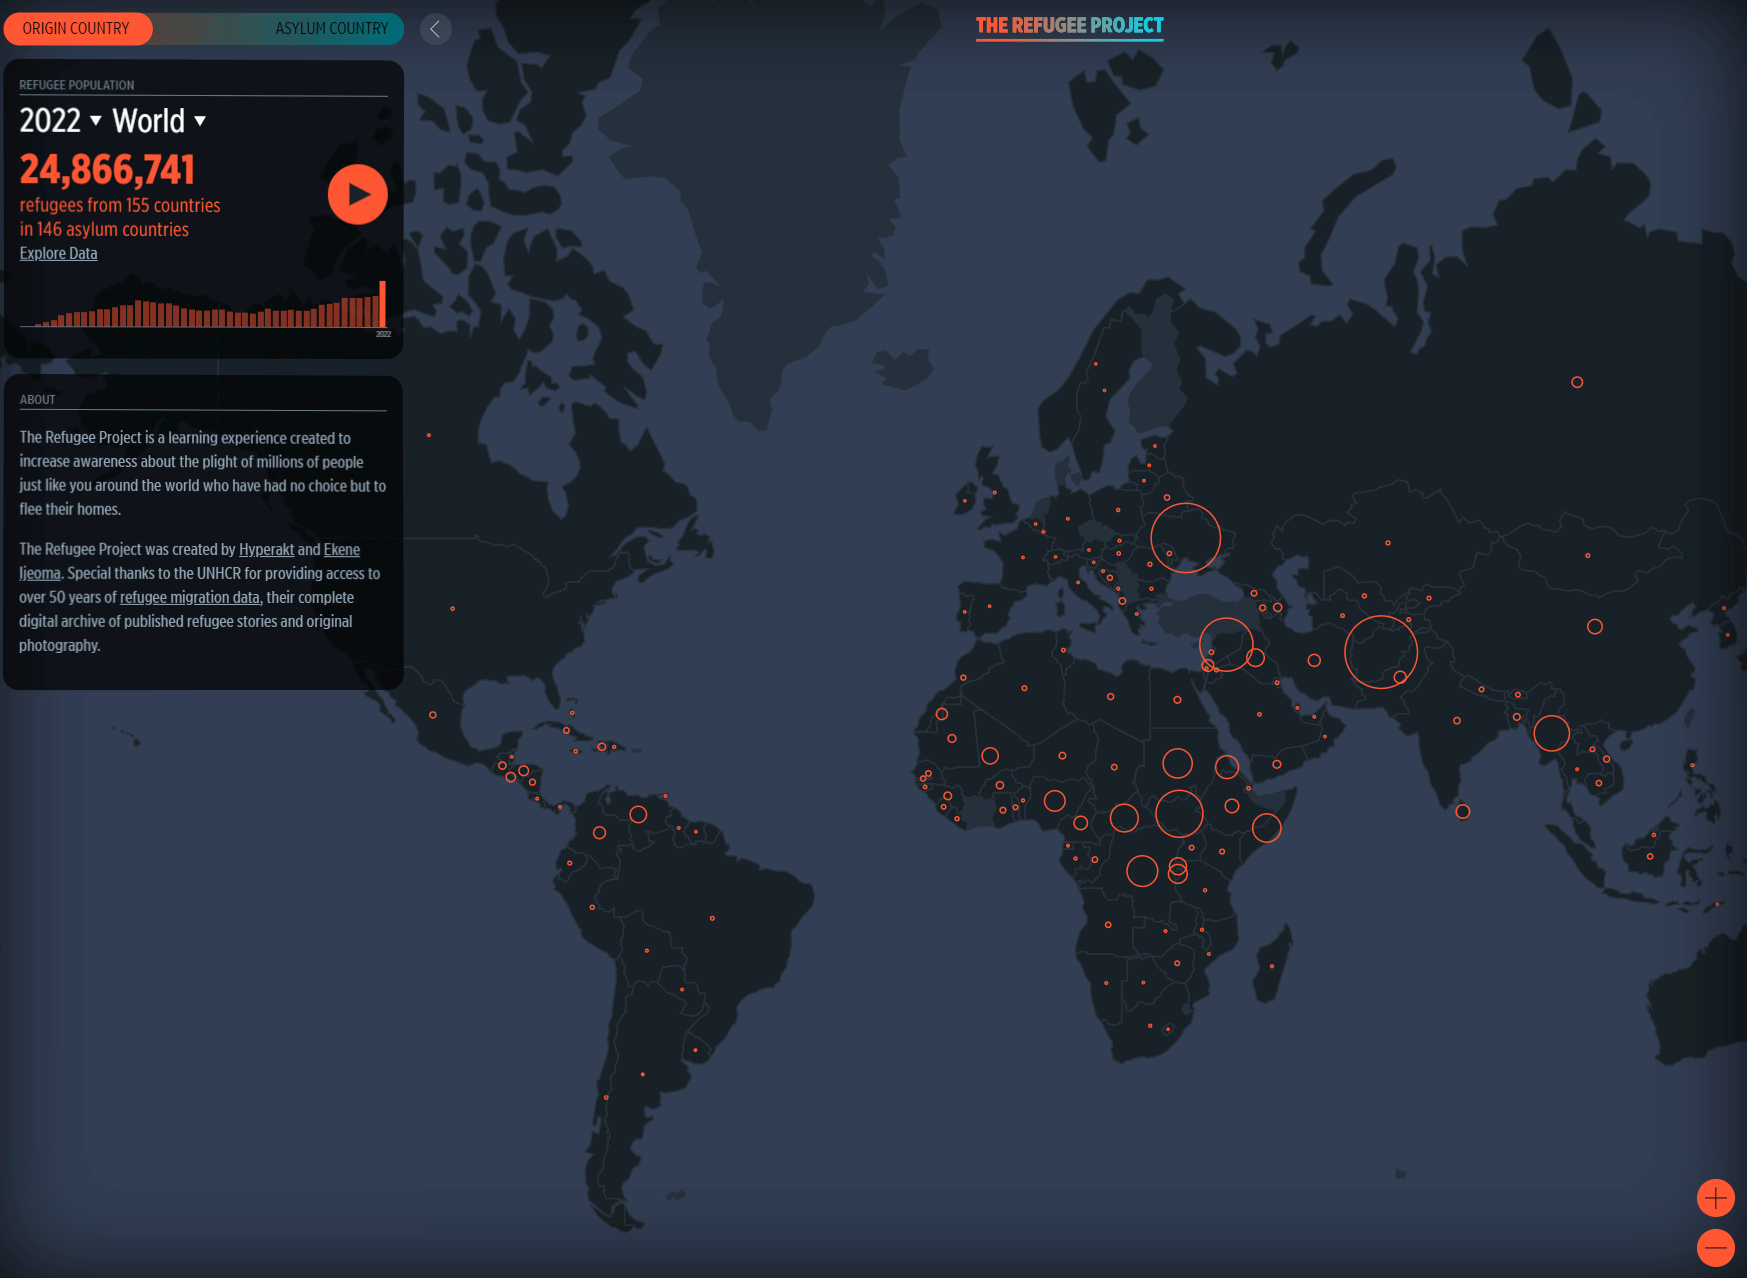 GIF showing some of the points on the refugee map made by The Refugee Project